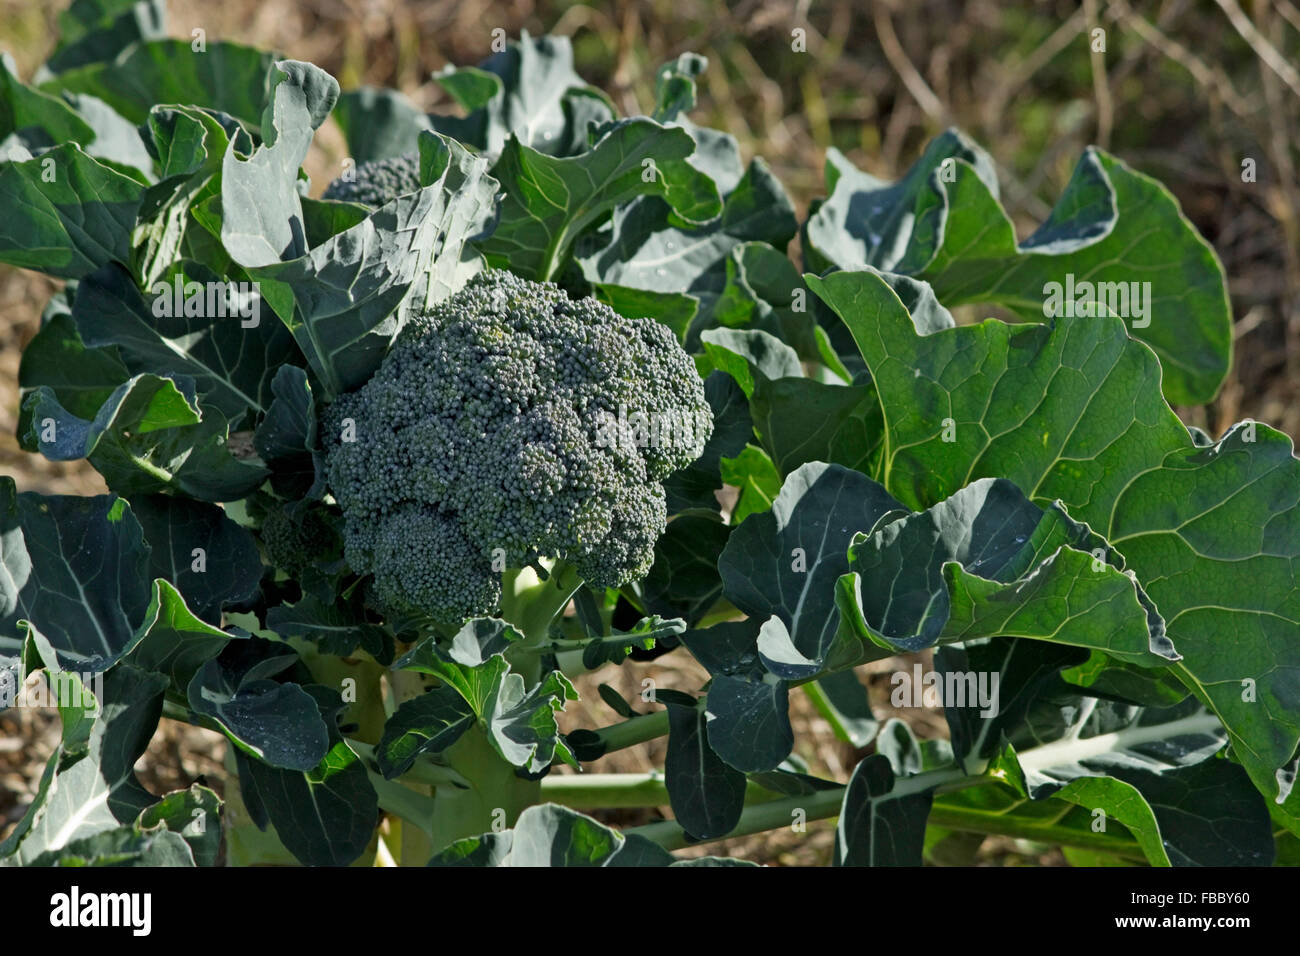 Broccoli plant and backlit leaves. Grows naturally in chemical-free / no pesticides soil. Lemnos island, Greece Stock Photo